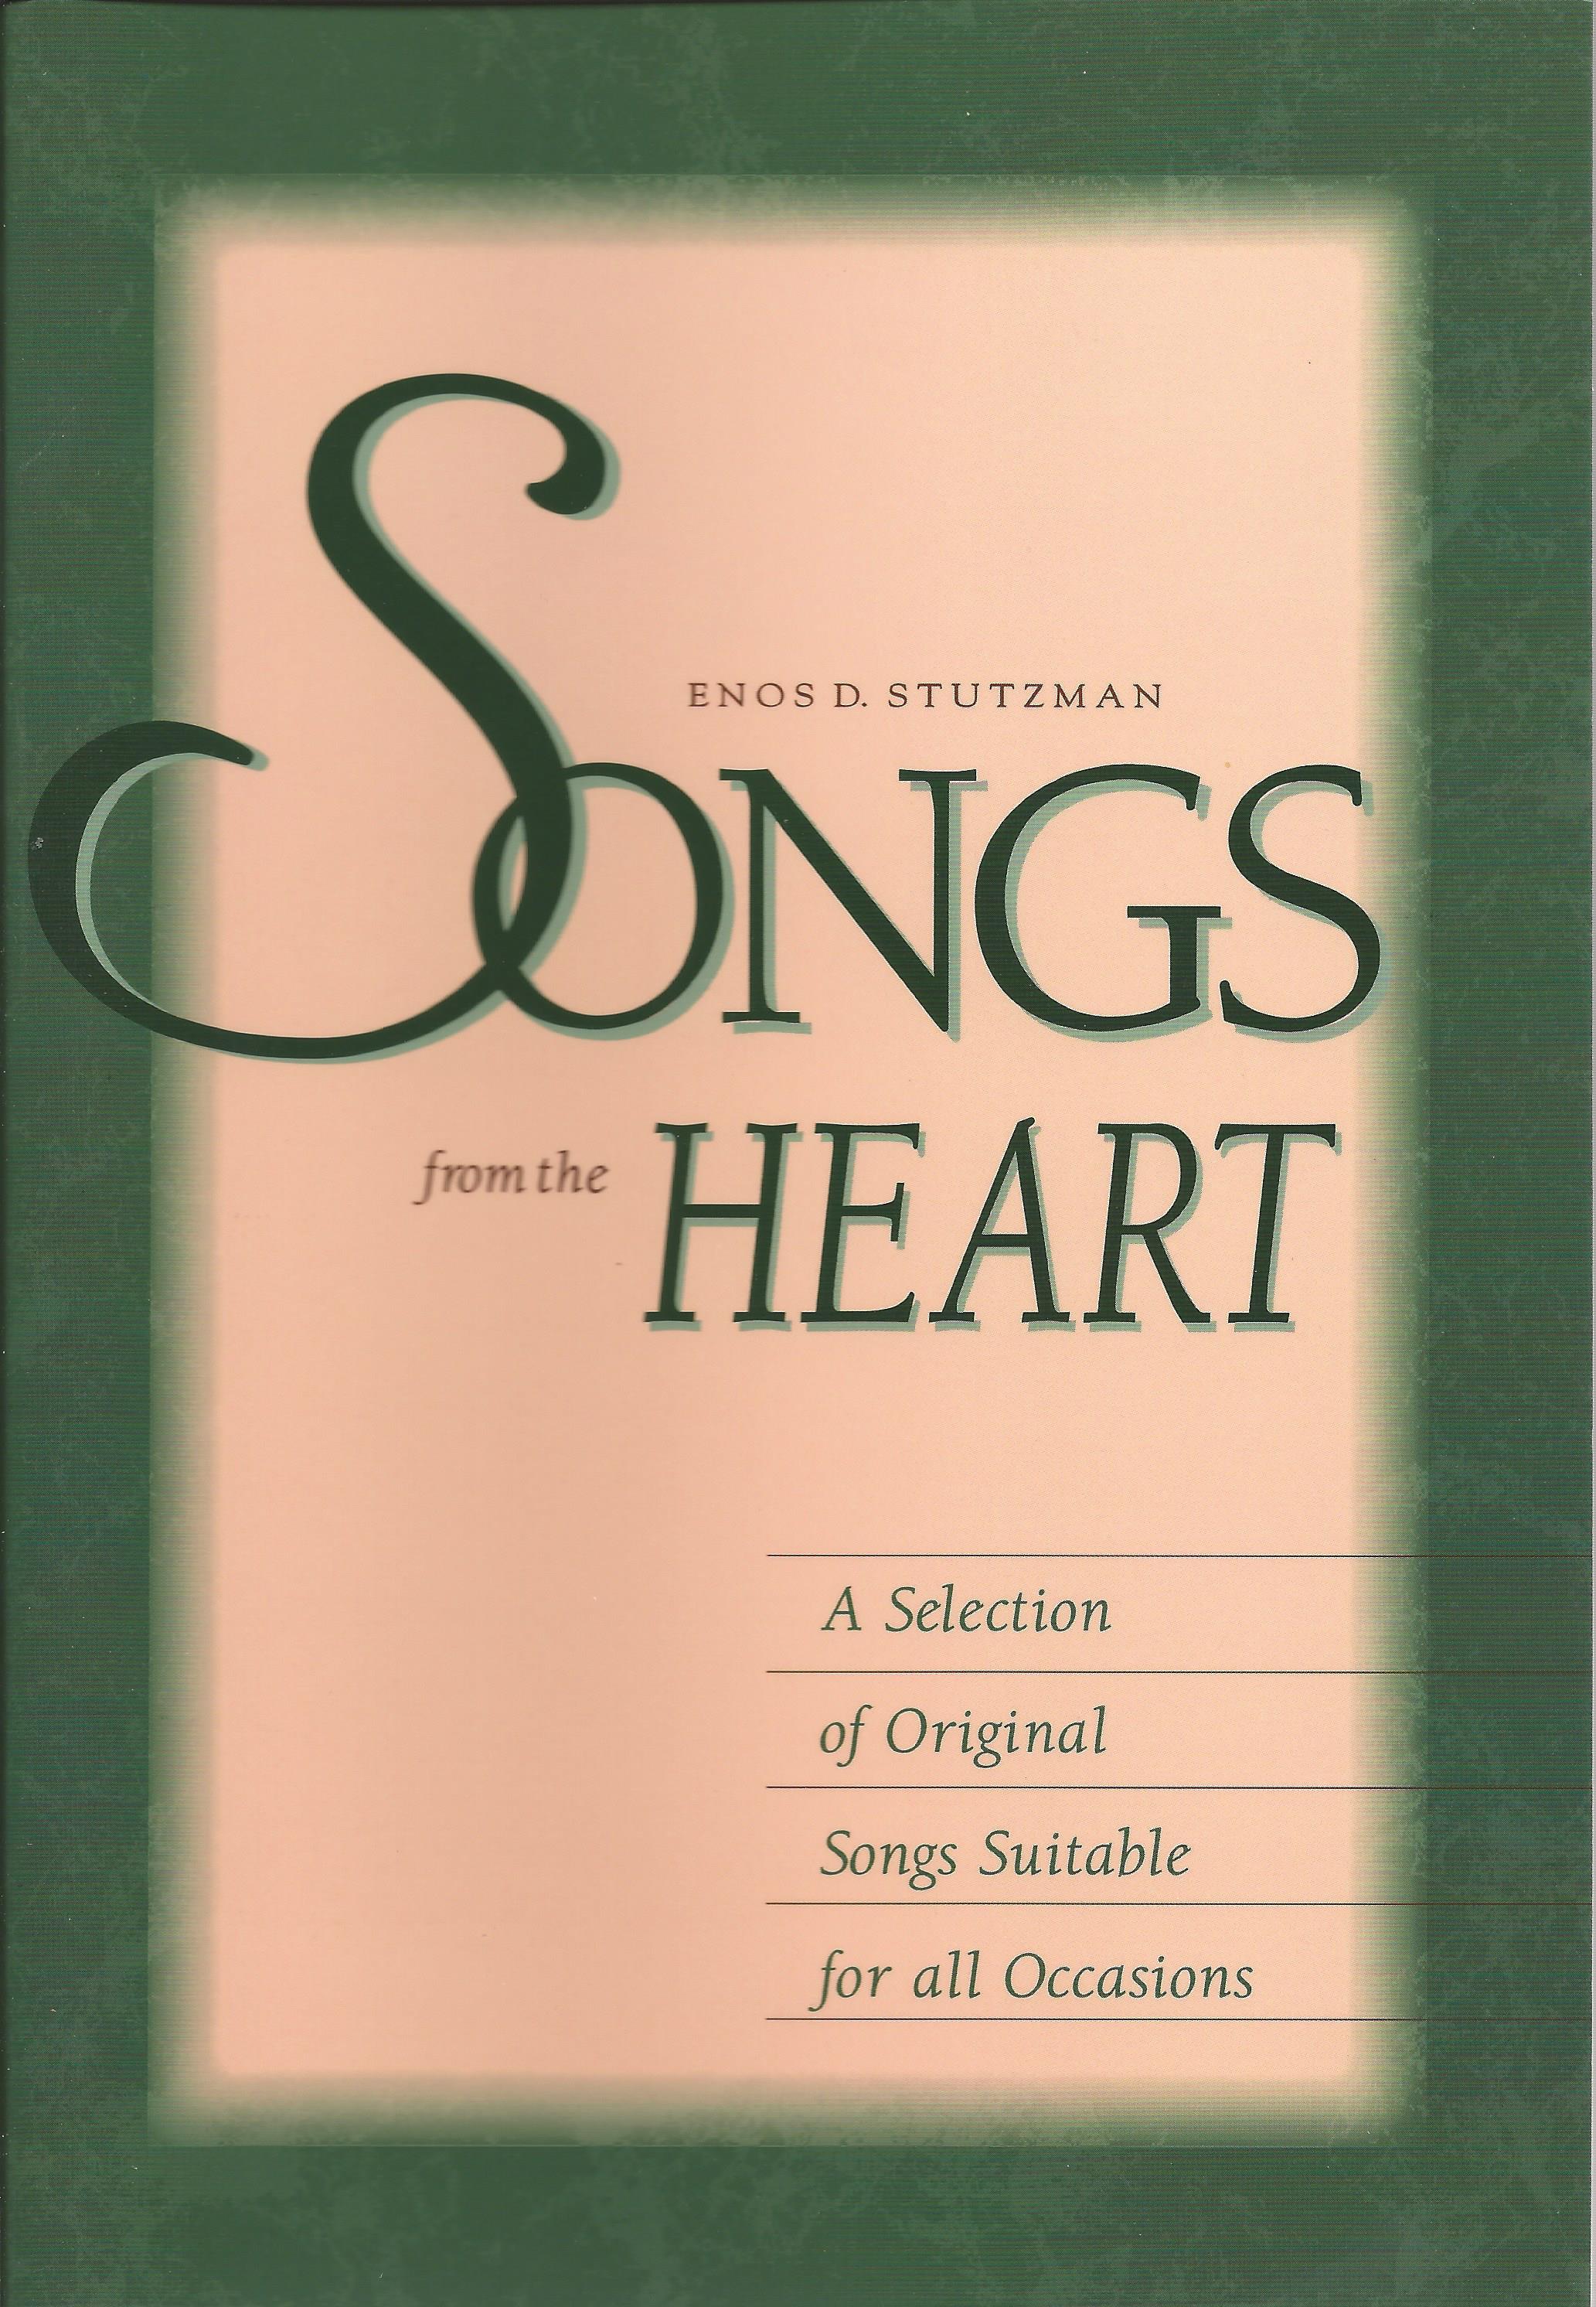 SONGS FROM THE HEART (ENOS D. STUTZMAN)